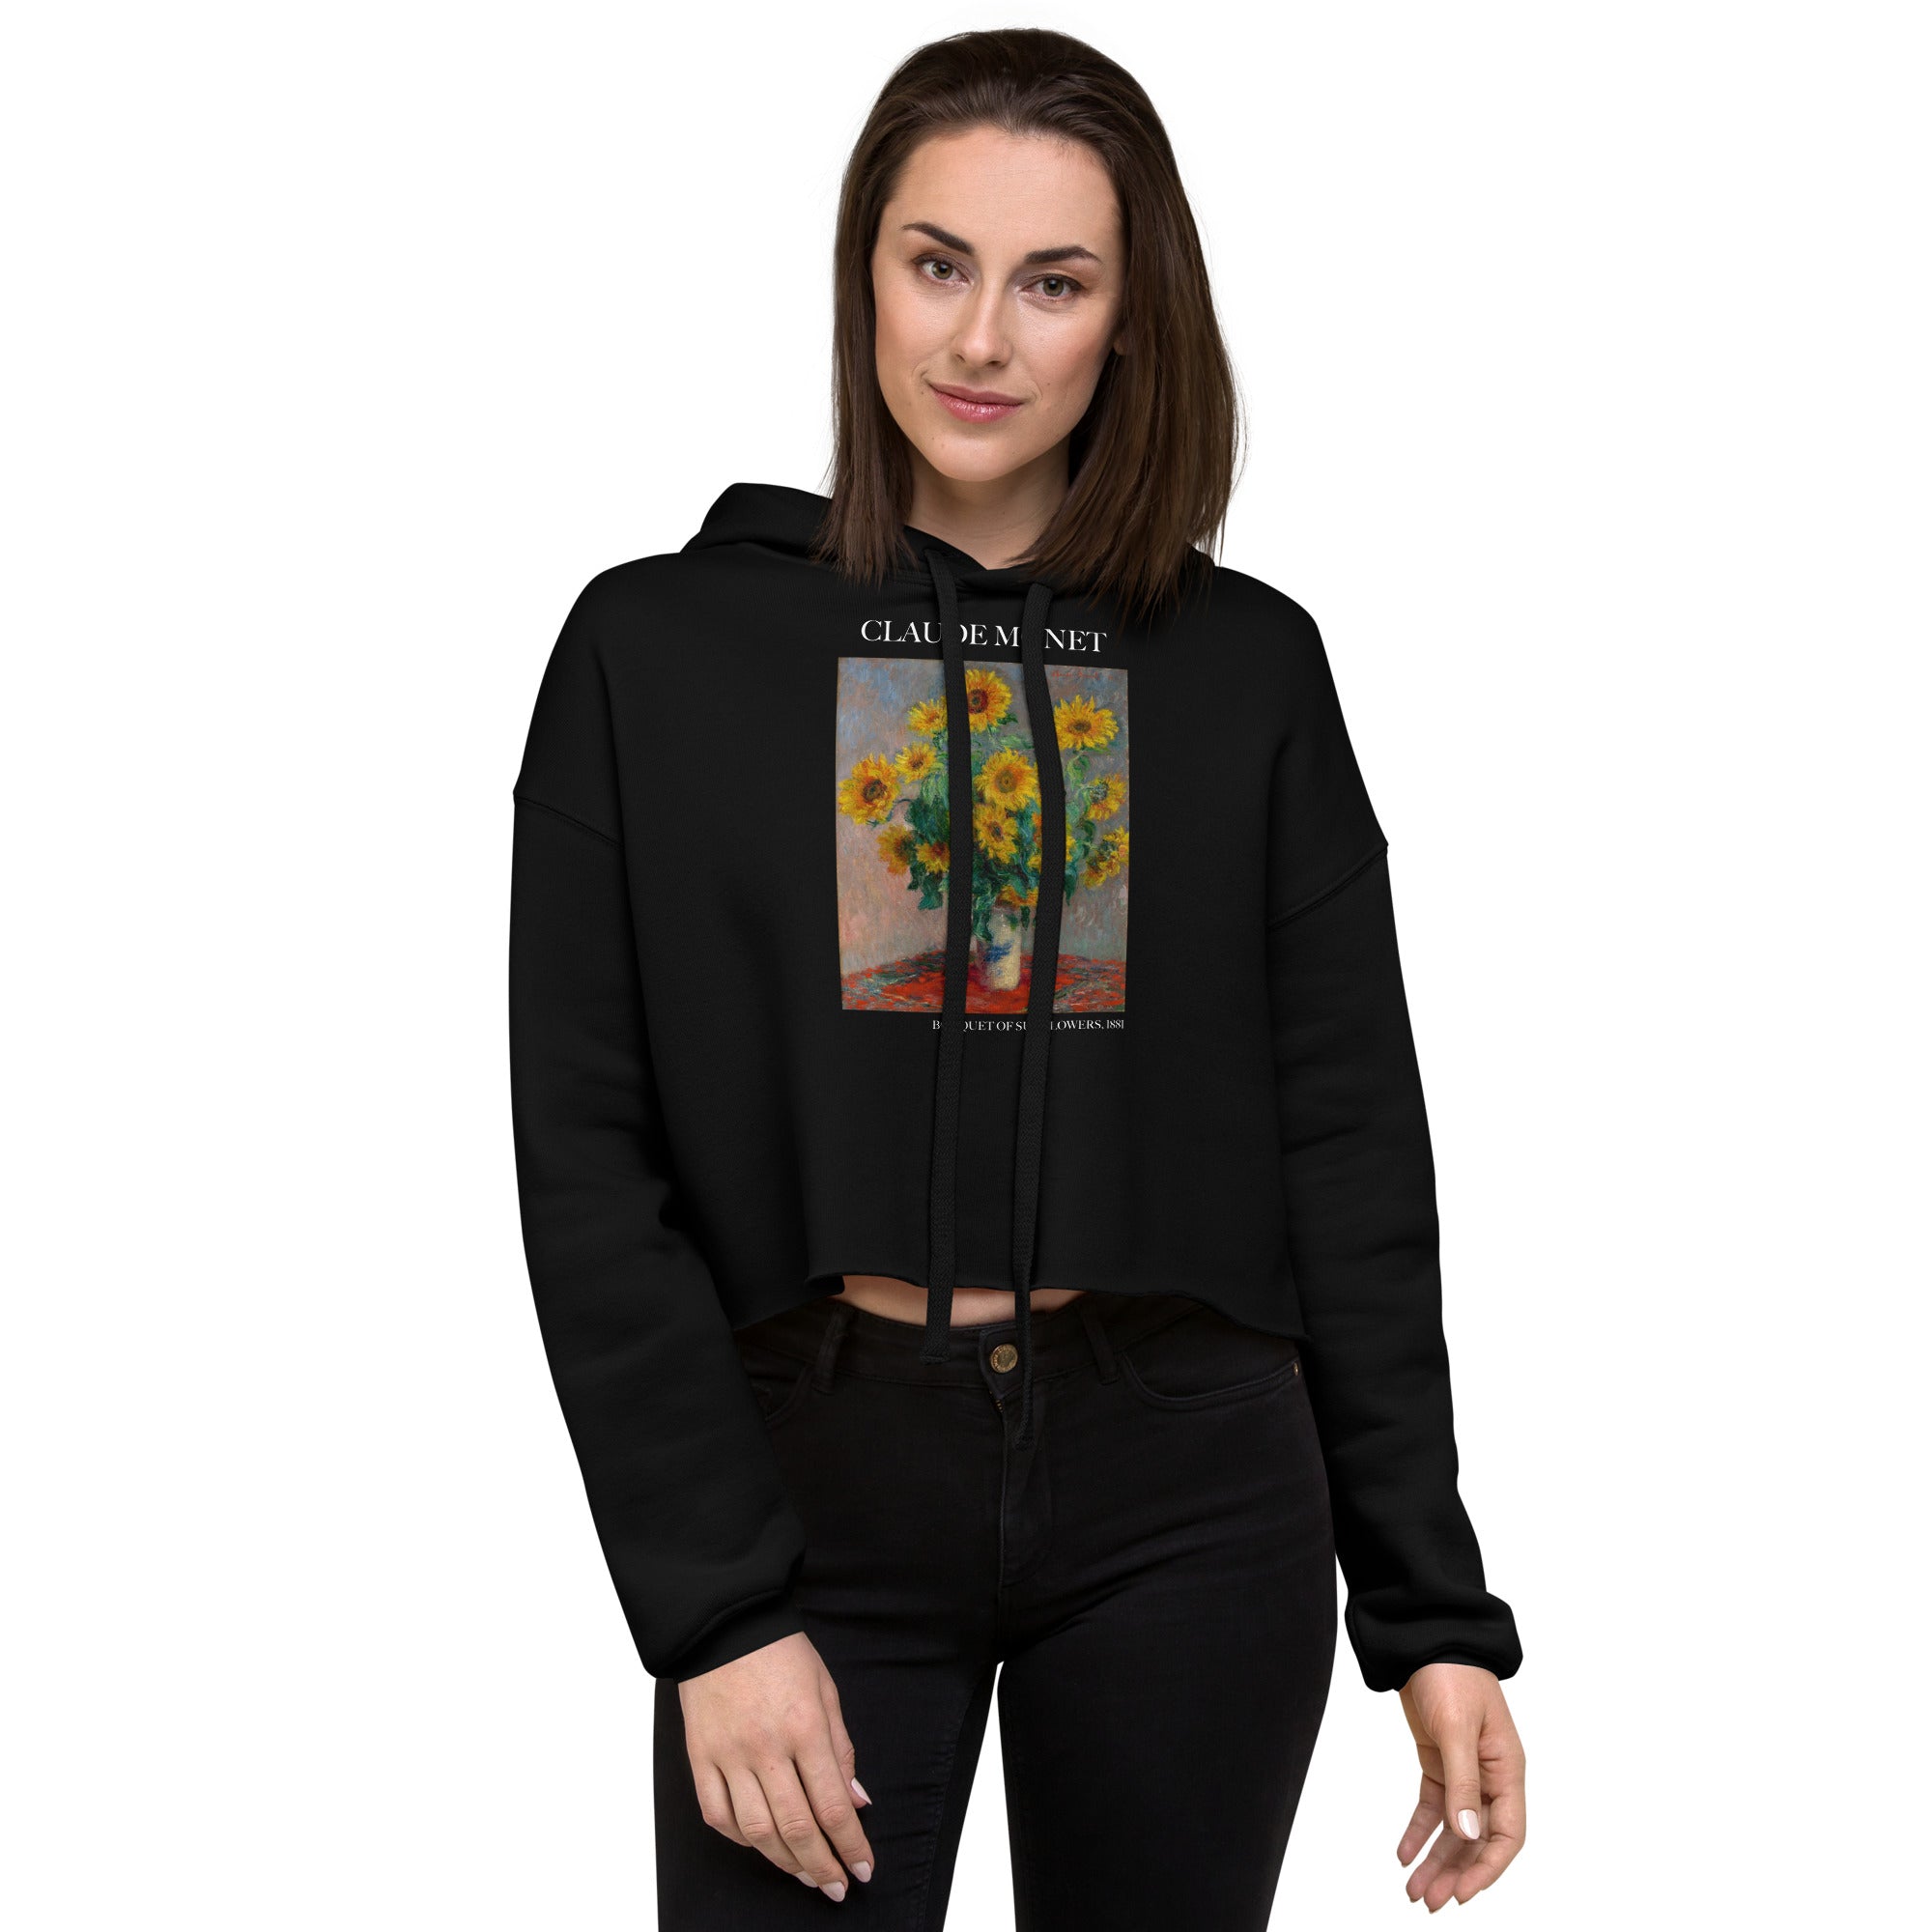 Claude Monet 'Bouquet of Sunflowers' Famous Painting Cropped Hoodie | Premium Art Cropped Hoodie